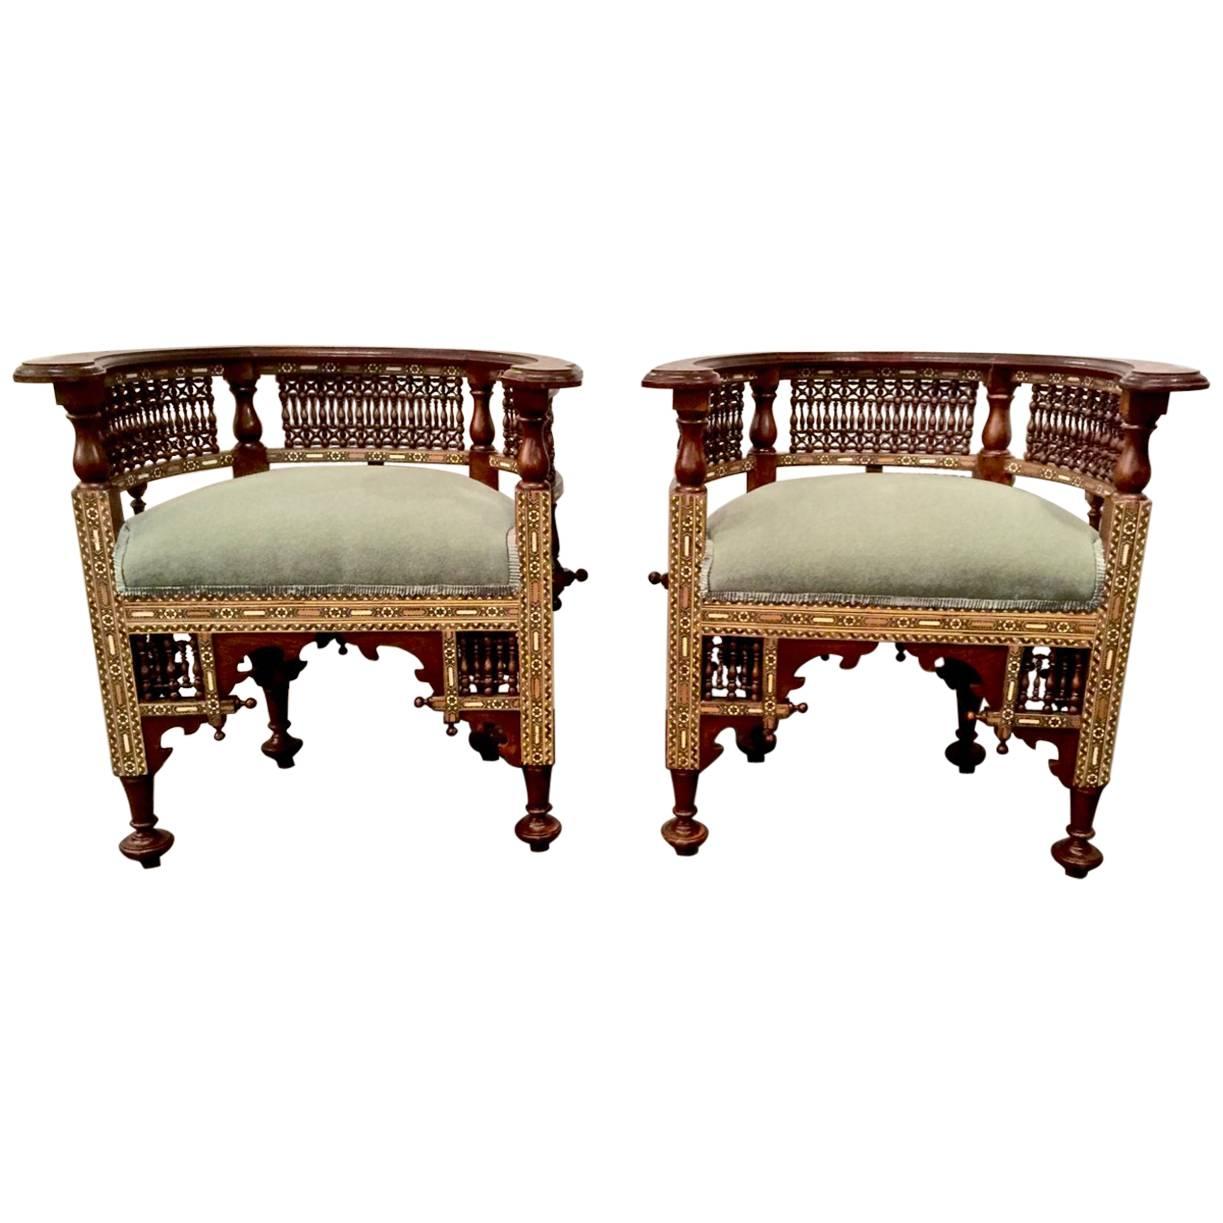 Pair of Antique Syrian Barrel Back Inlaid Chairs